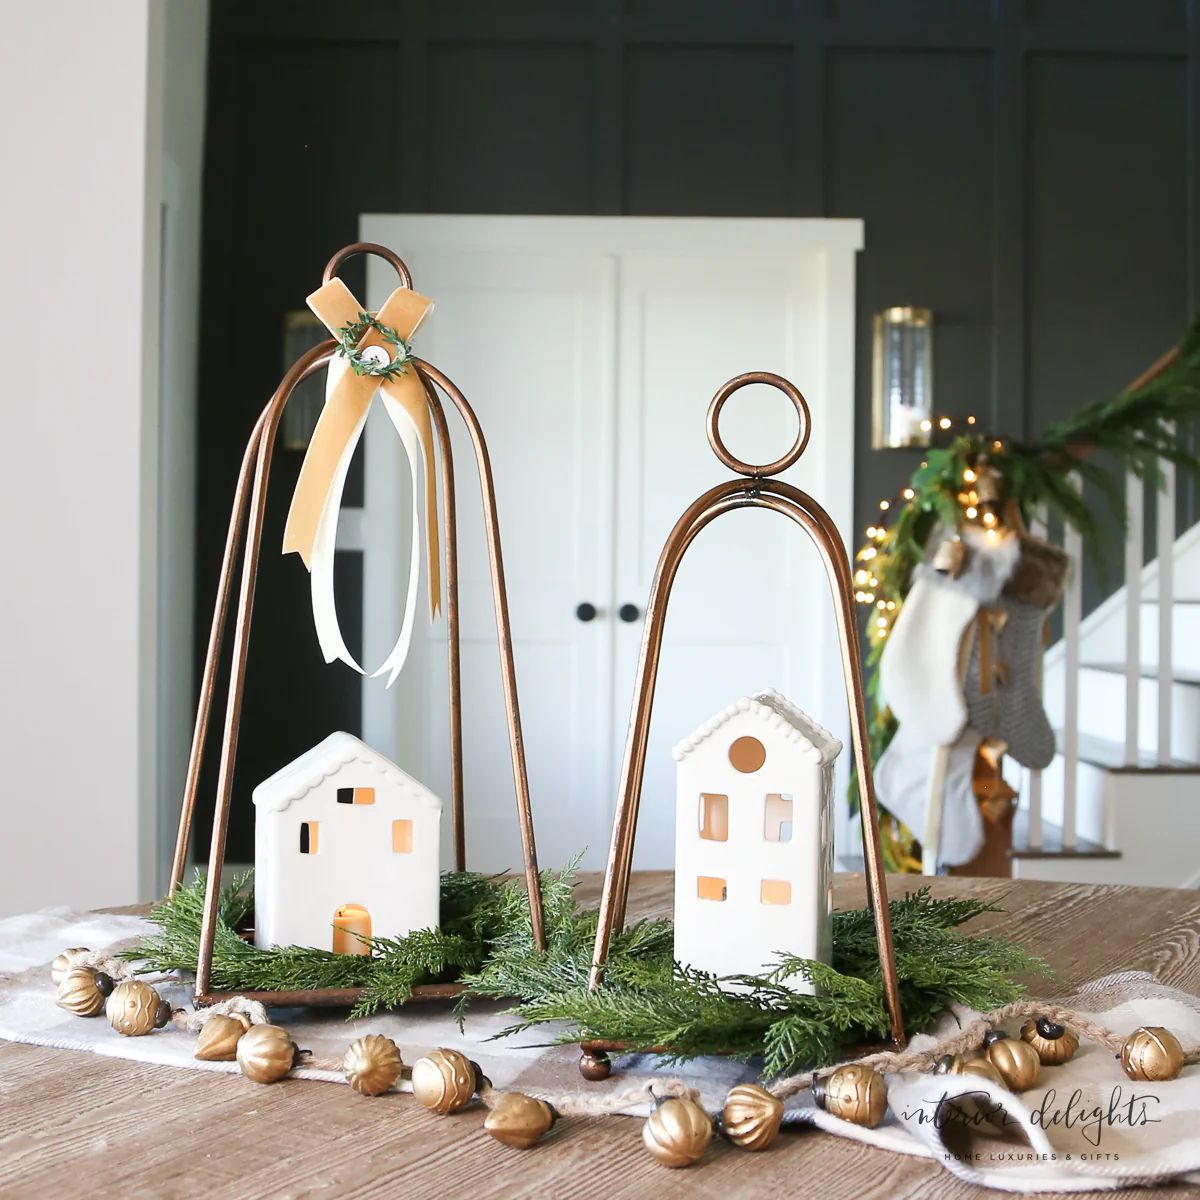 SHOP THE LOOK BUNDLE: Houses with Copper Lanterns and Cedar Candle Rings Bundle-COMING SOON | Interior Delights